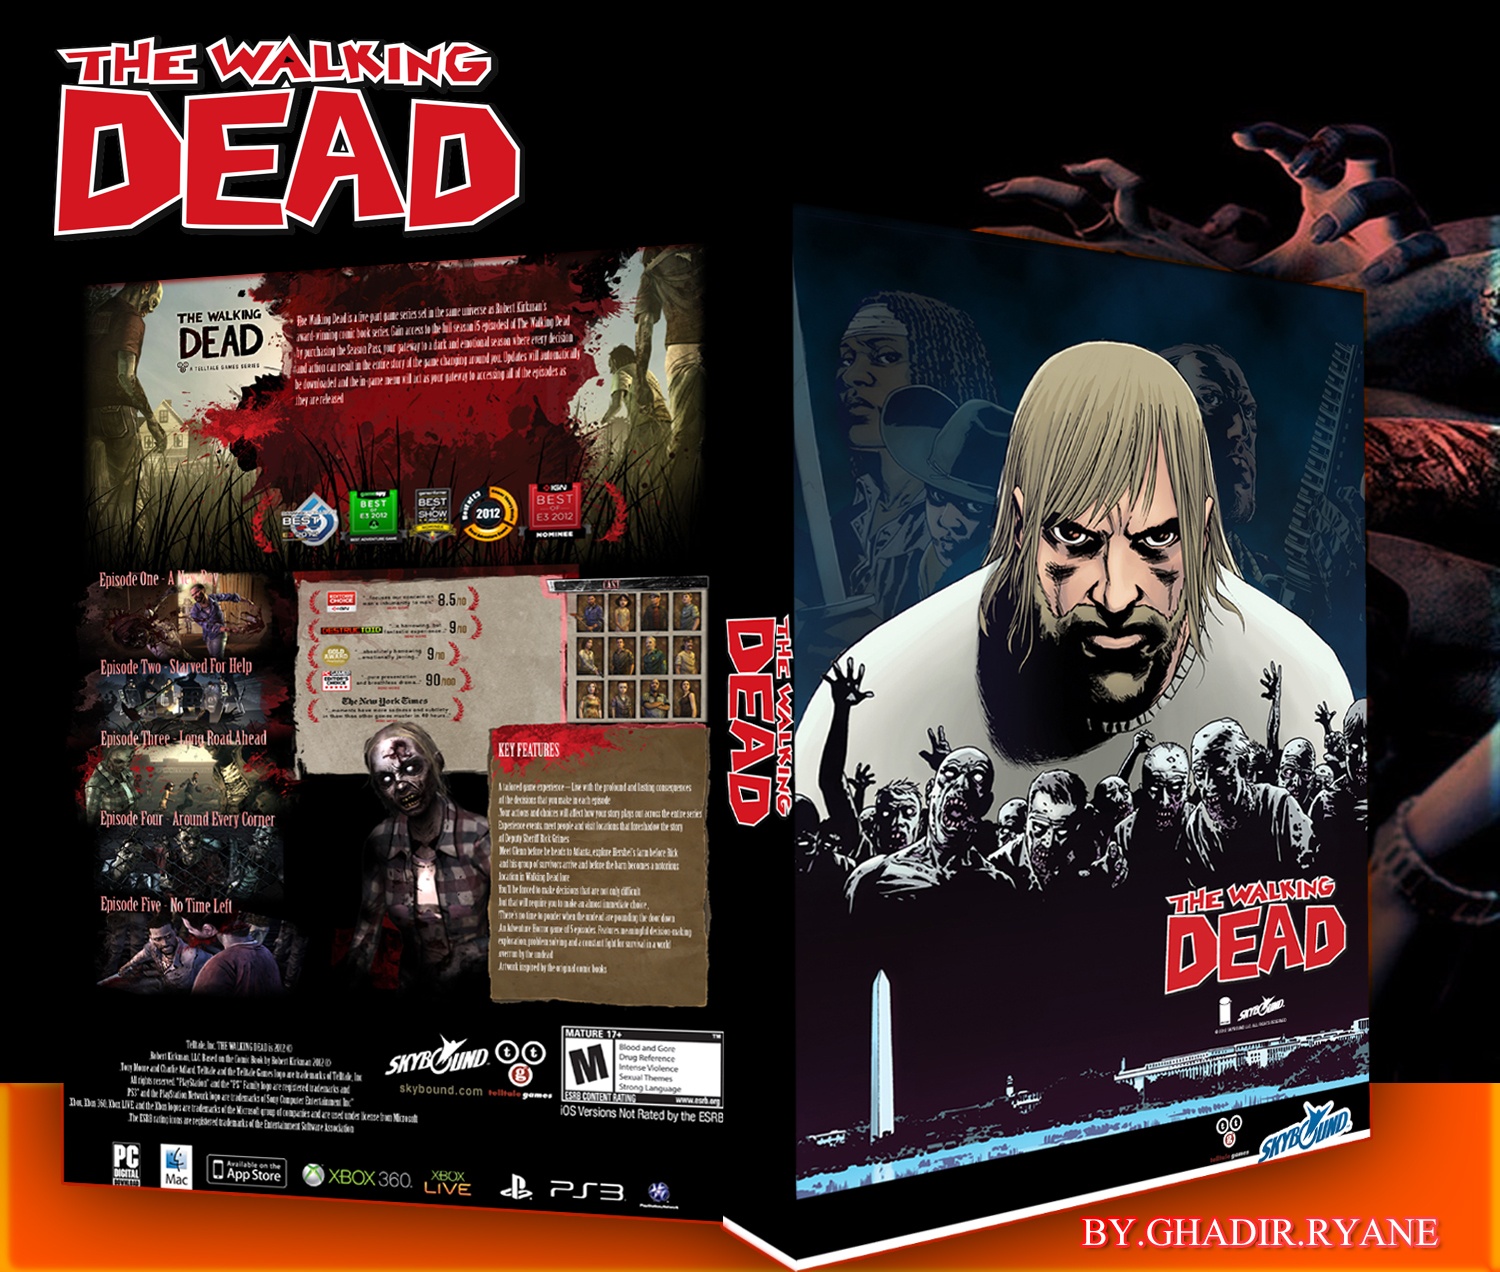 The Walking Dead box cover